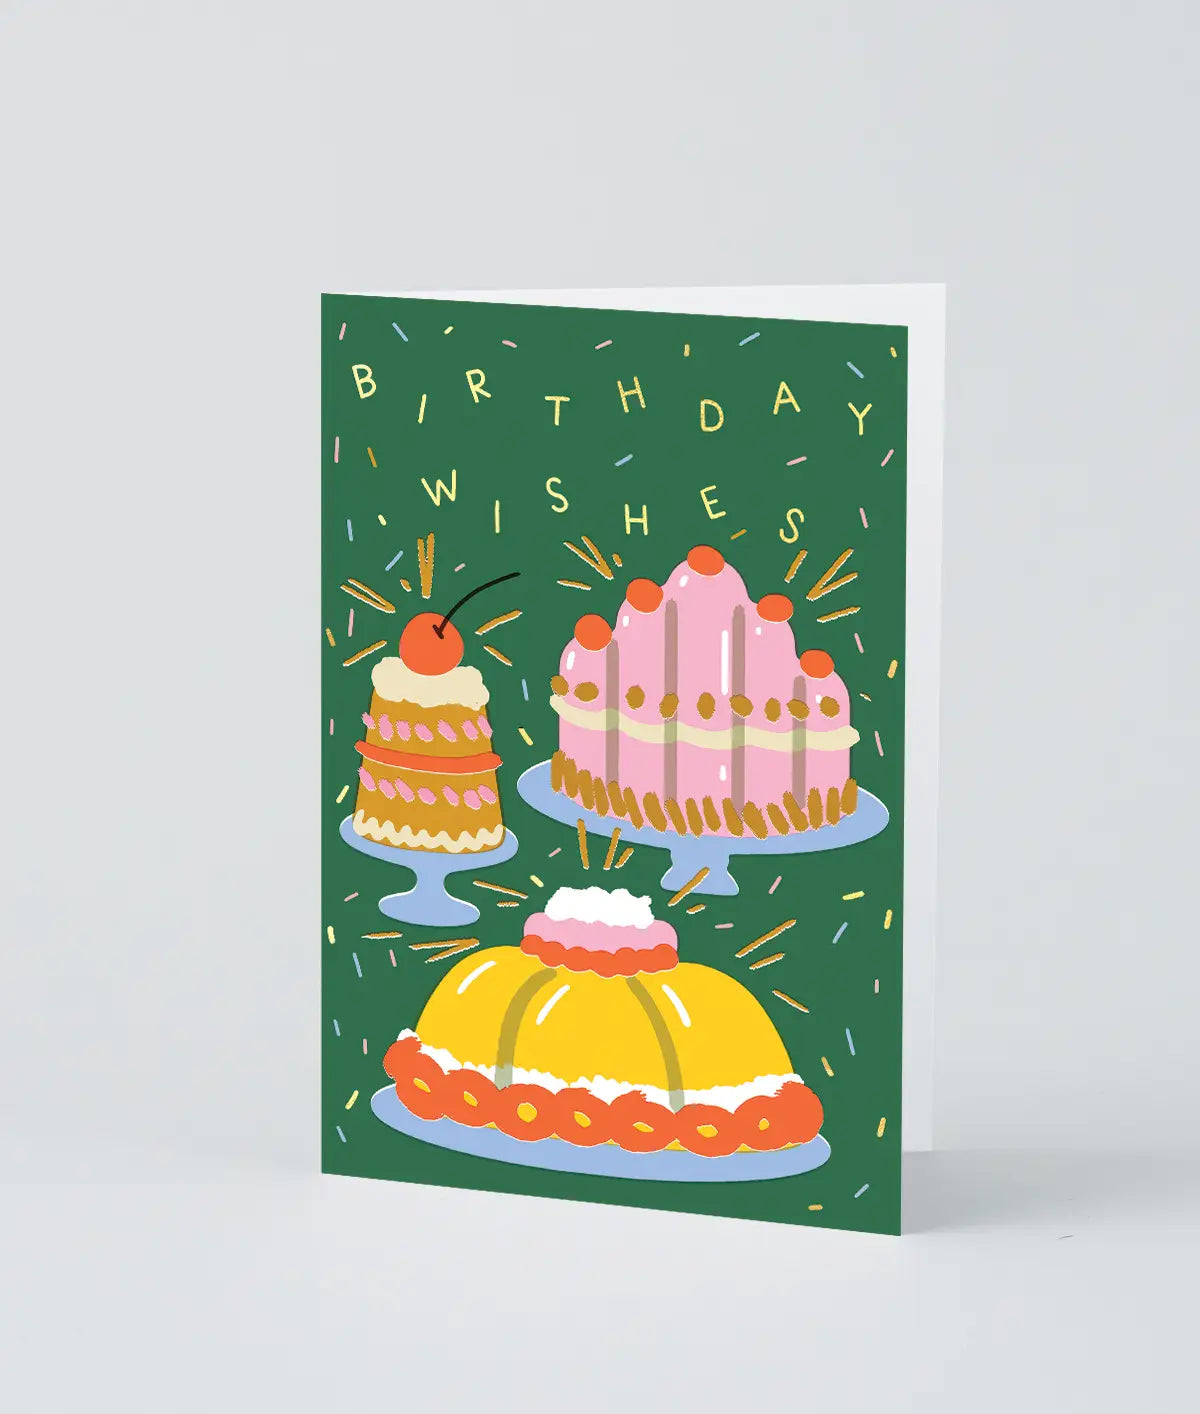 Birthday Wishes Cake- Foiled Card - Moon Room Shop and Wellness